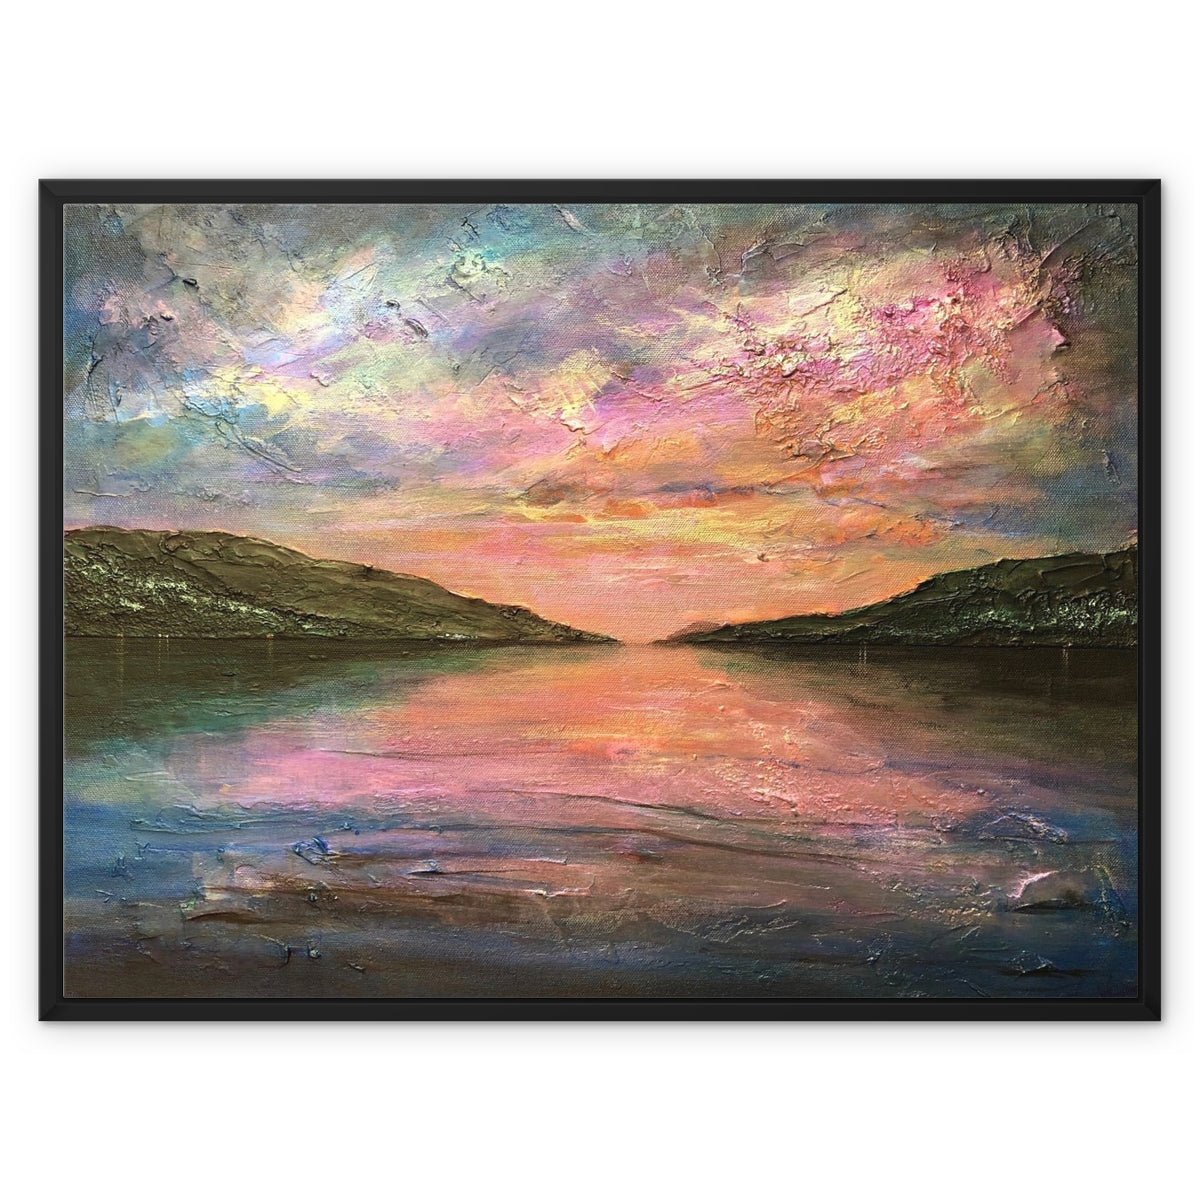 Loch Ness Dawn Painting | Framed Canvas-Floating Framed Canvas Prints-Scottish Lochs & Mountains Art Gallery-32"x24"-Black Frame-Paintings, Prints, Homeware, Art Gifts From Scotland By Scottish Artist Kevin Hunter